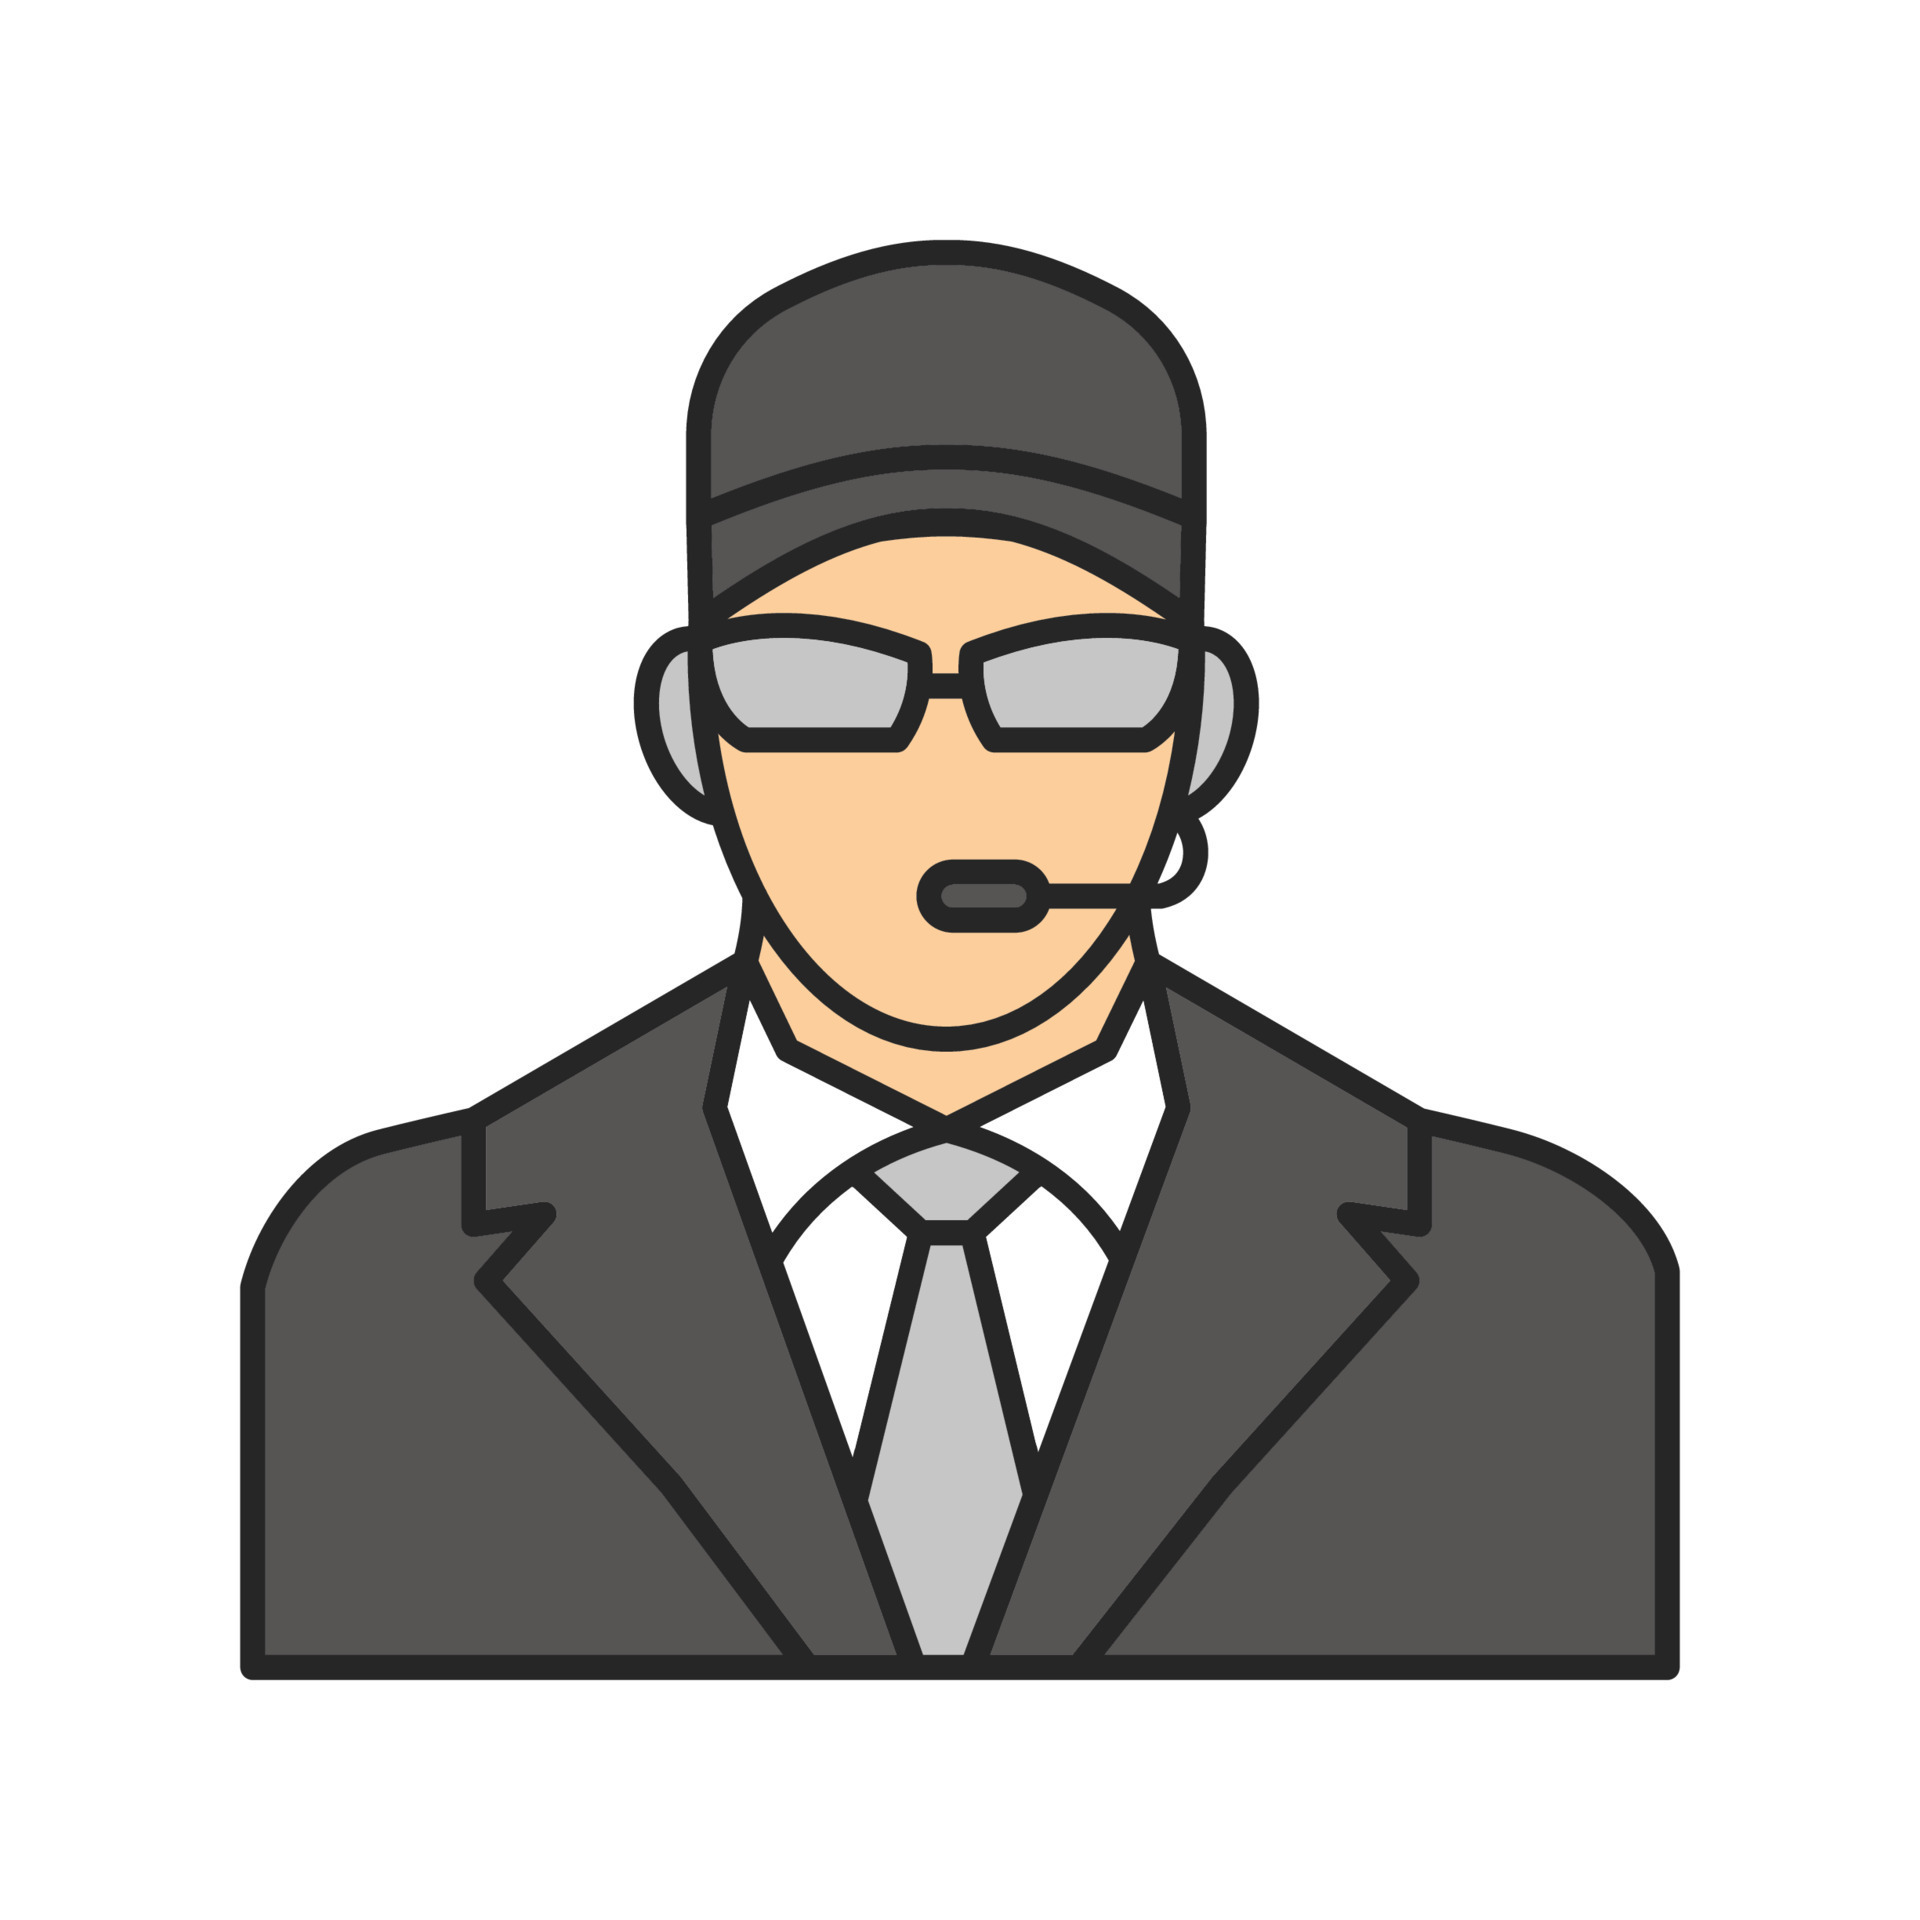 https://static.vecteezy.com/system/resources/previews/007/214/613/original/security-guard-color-icon-bodyguard-isolated-illustration-vector.jpg